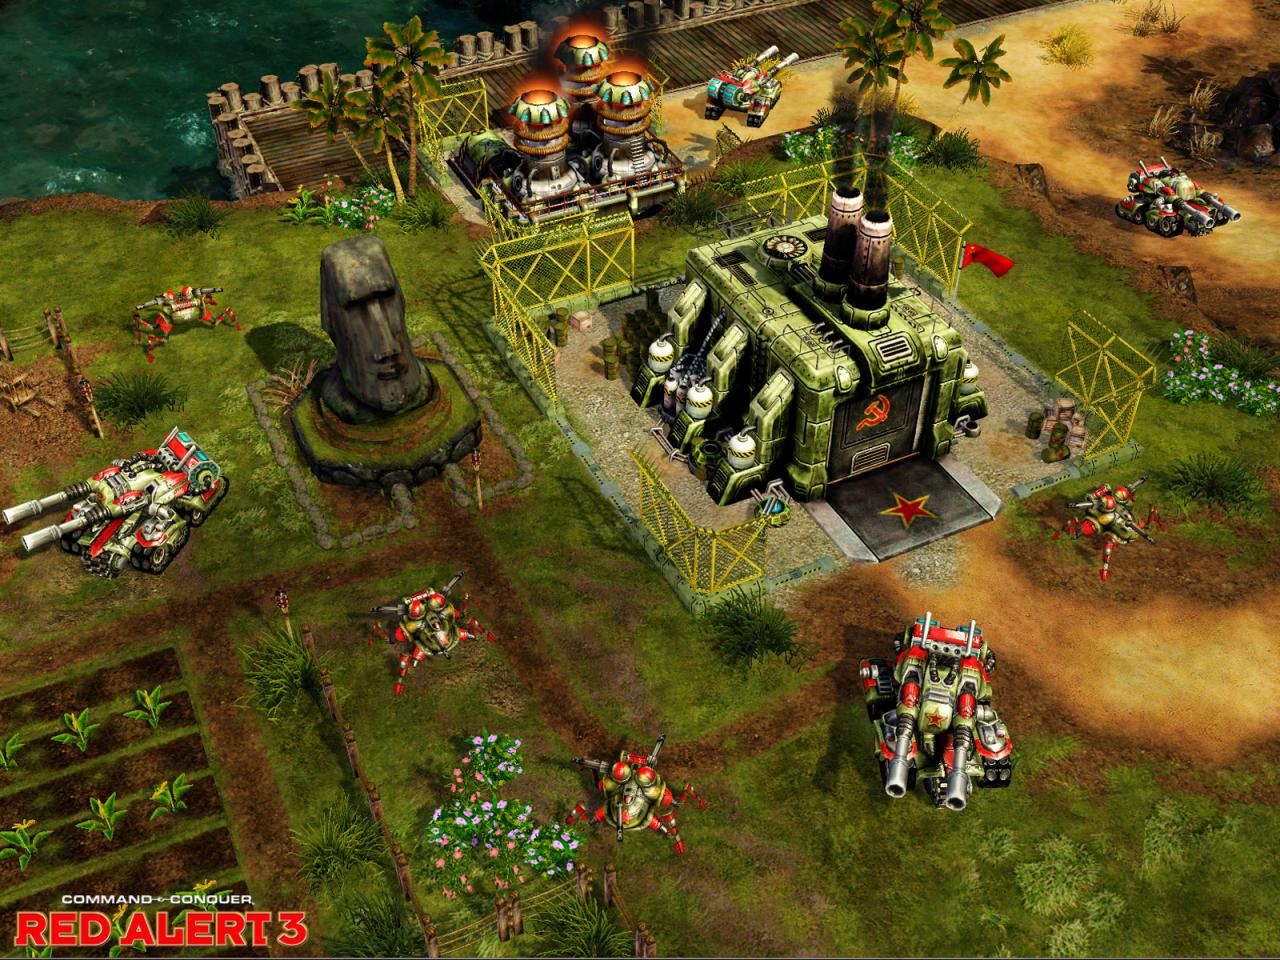 Command And Conquer Red Alert 3 Uprising [5.2GB]